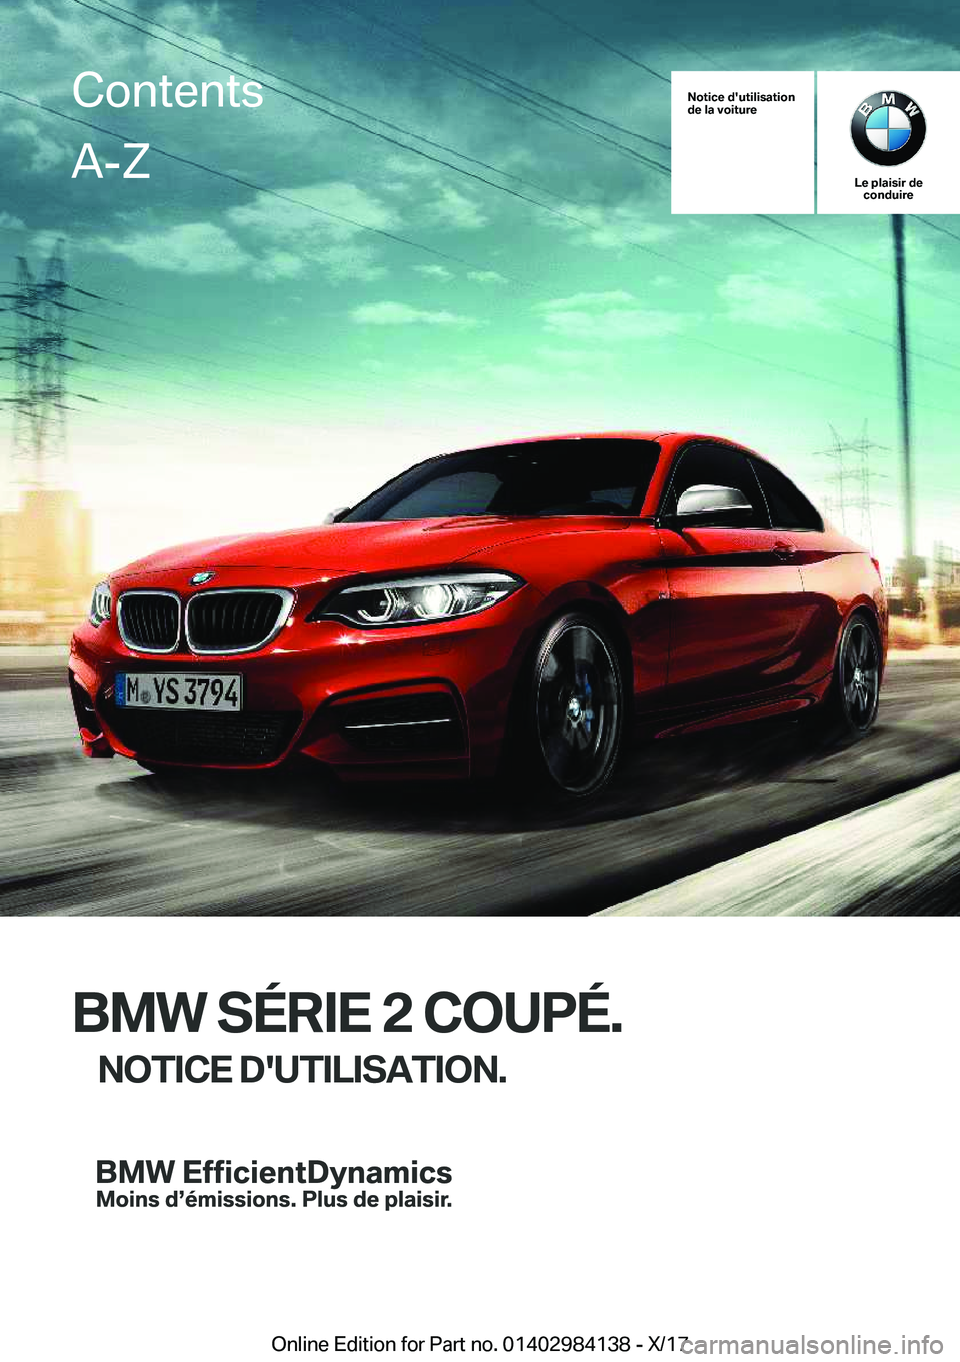 BMW 2 SERIES COUPE 2018  Notices Demploi (in French) �N�o�t�i�c�e��d�'�u�t�i�l�i�s�a�t�i�o�n
�d�e��l�a��v�o�i�t�u�r�e
�L�e��p�l�a�i�s�i�r��d�e �c�o�n�d�u�i�r�e
�B�M�W��S�